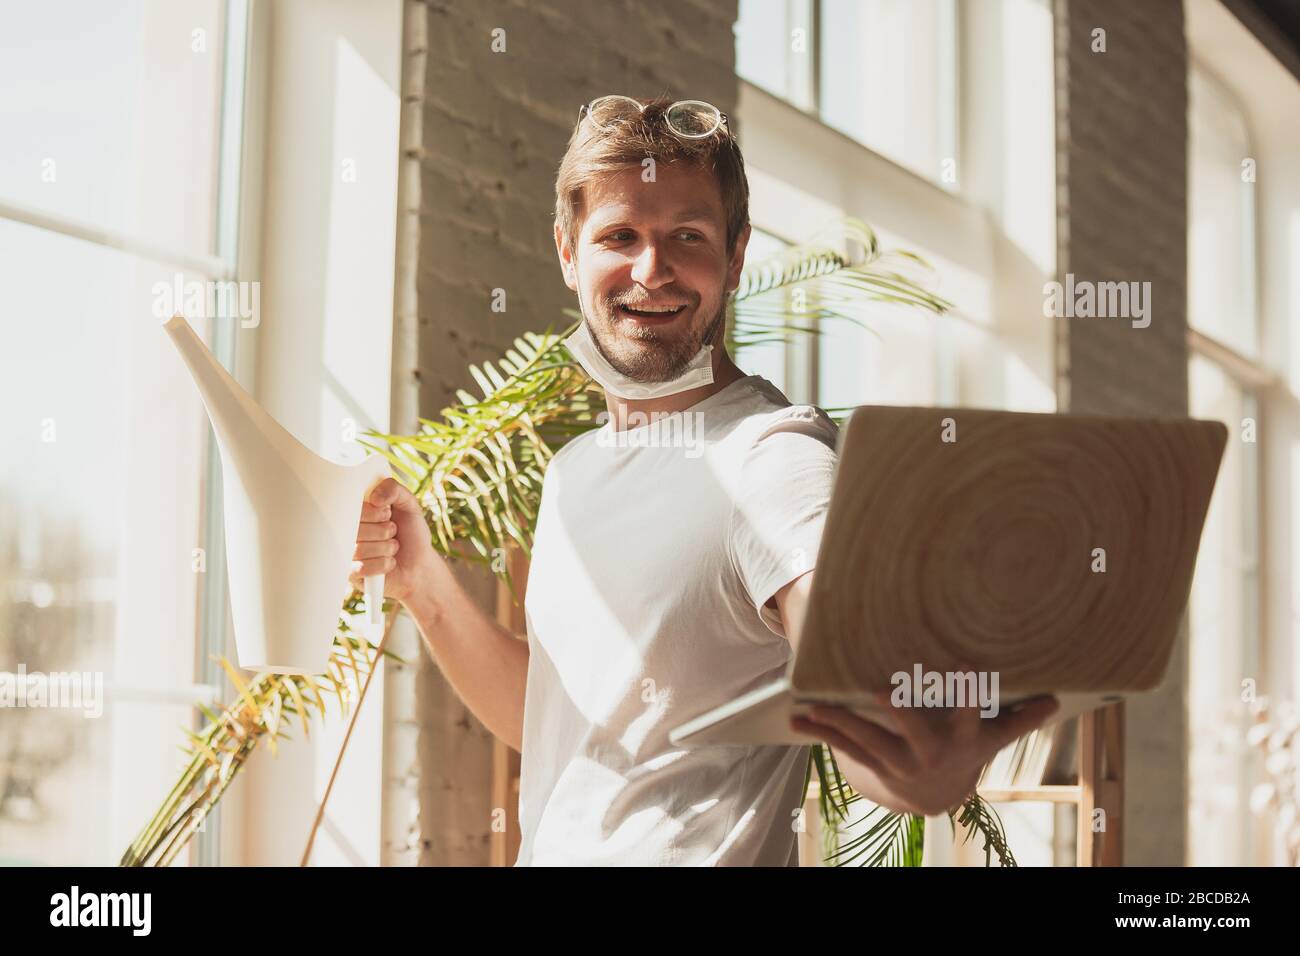 Young man studying at home during online courses for gardener, biologist, florist. Getting profession while isolated, quarantine against coronavirus spreading. Using laptop, smartphone, headphones. Stock Photo